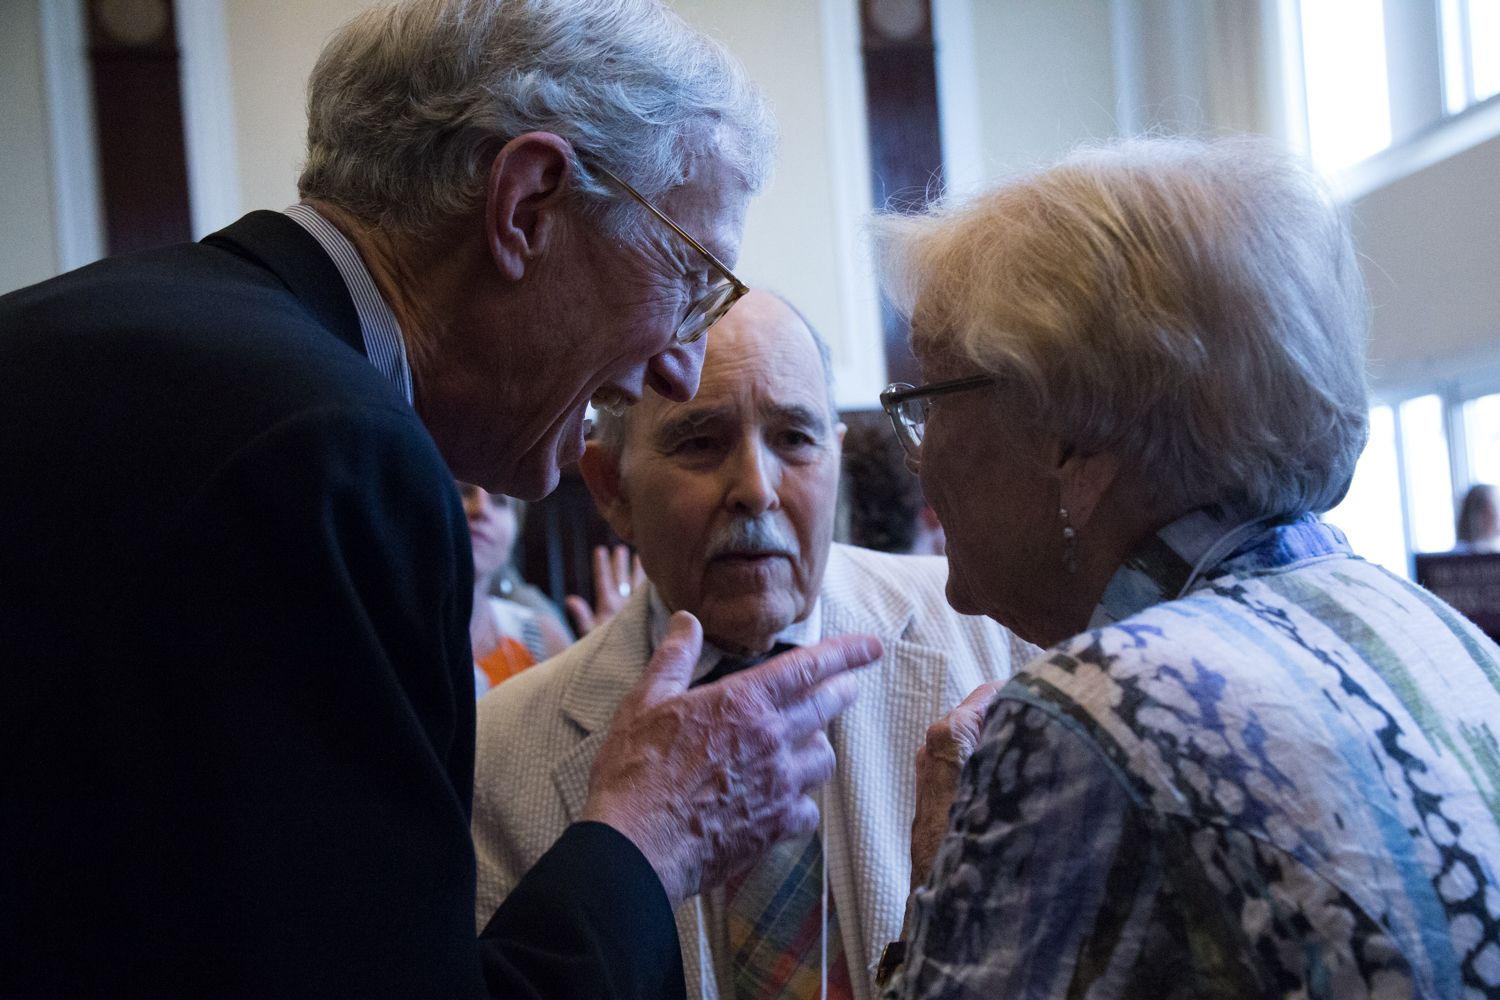 Pulitzer Center board member Richard Moore speaks with guests Lincoln Day and Alice Day. Image by Lorraine Ustaris. Washington, D.C., 2018.